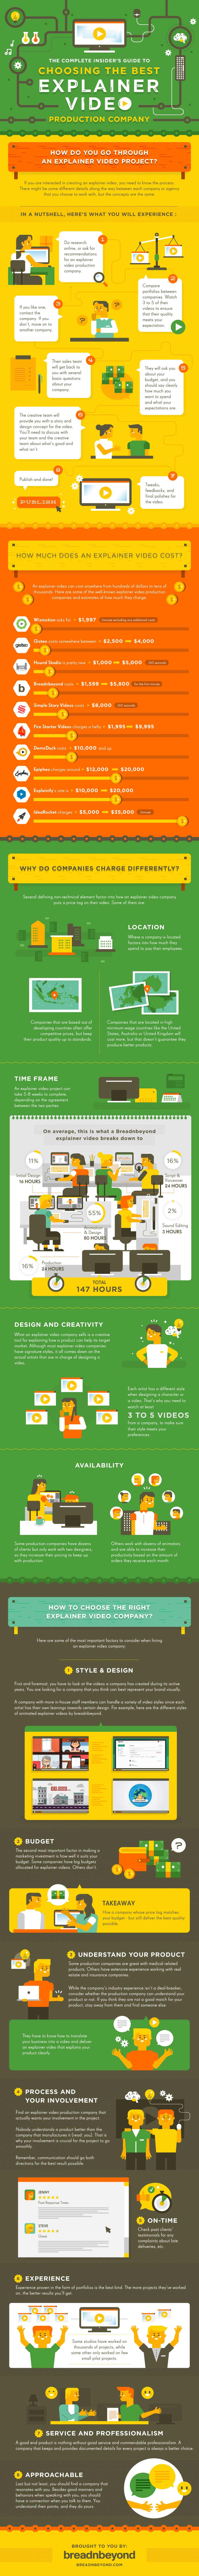 Explainer Video Production Company Infographic